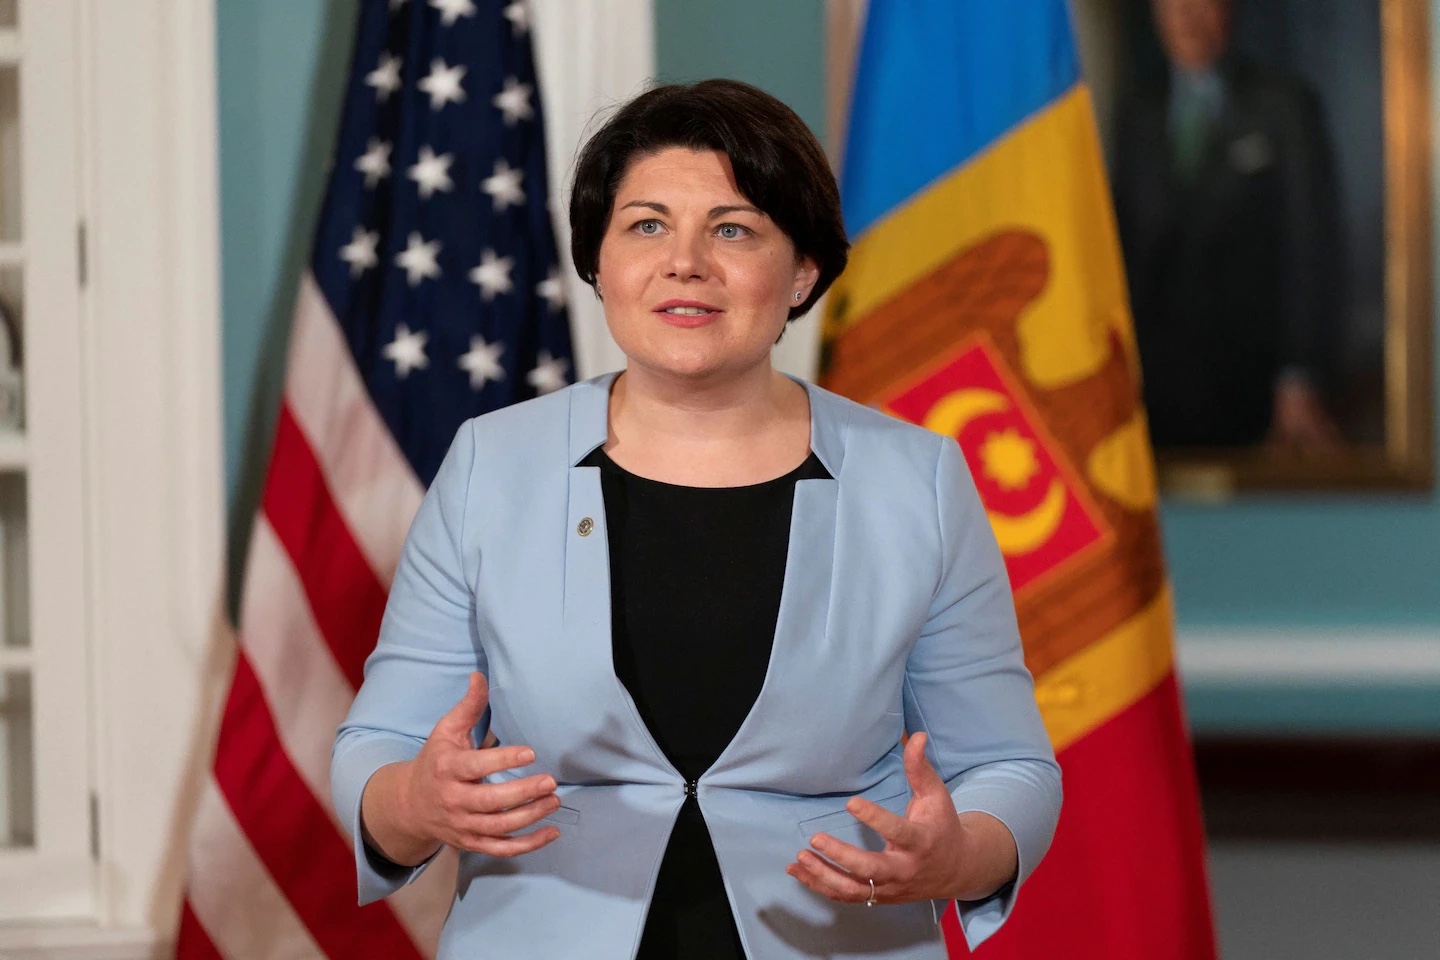 Moldova’s PM says she’s ‘very worried’ Russia will invade her country next